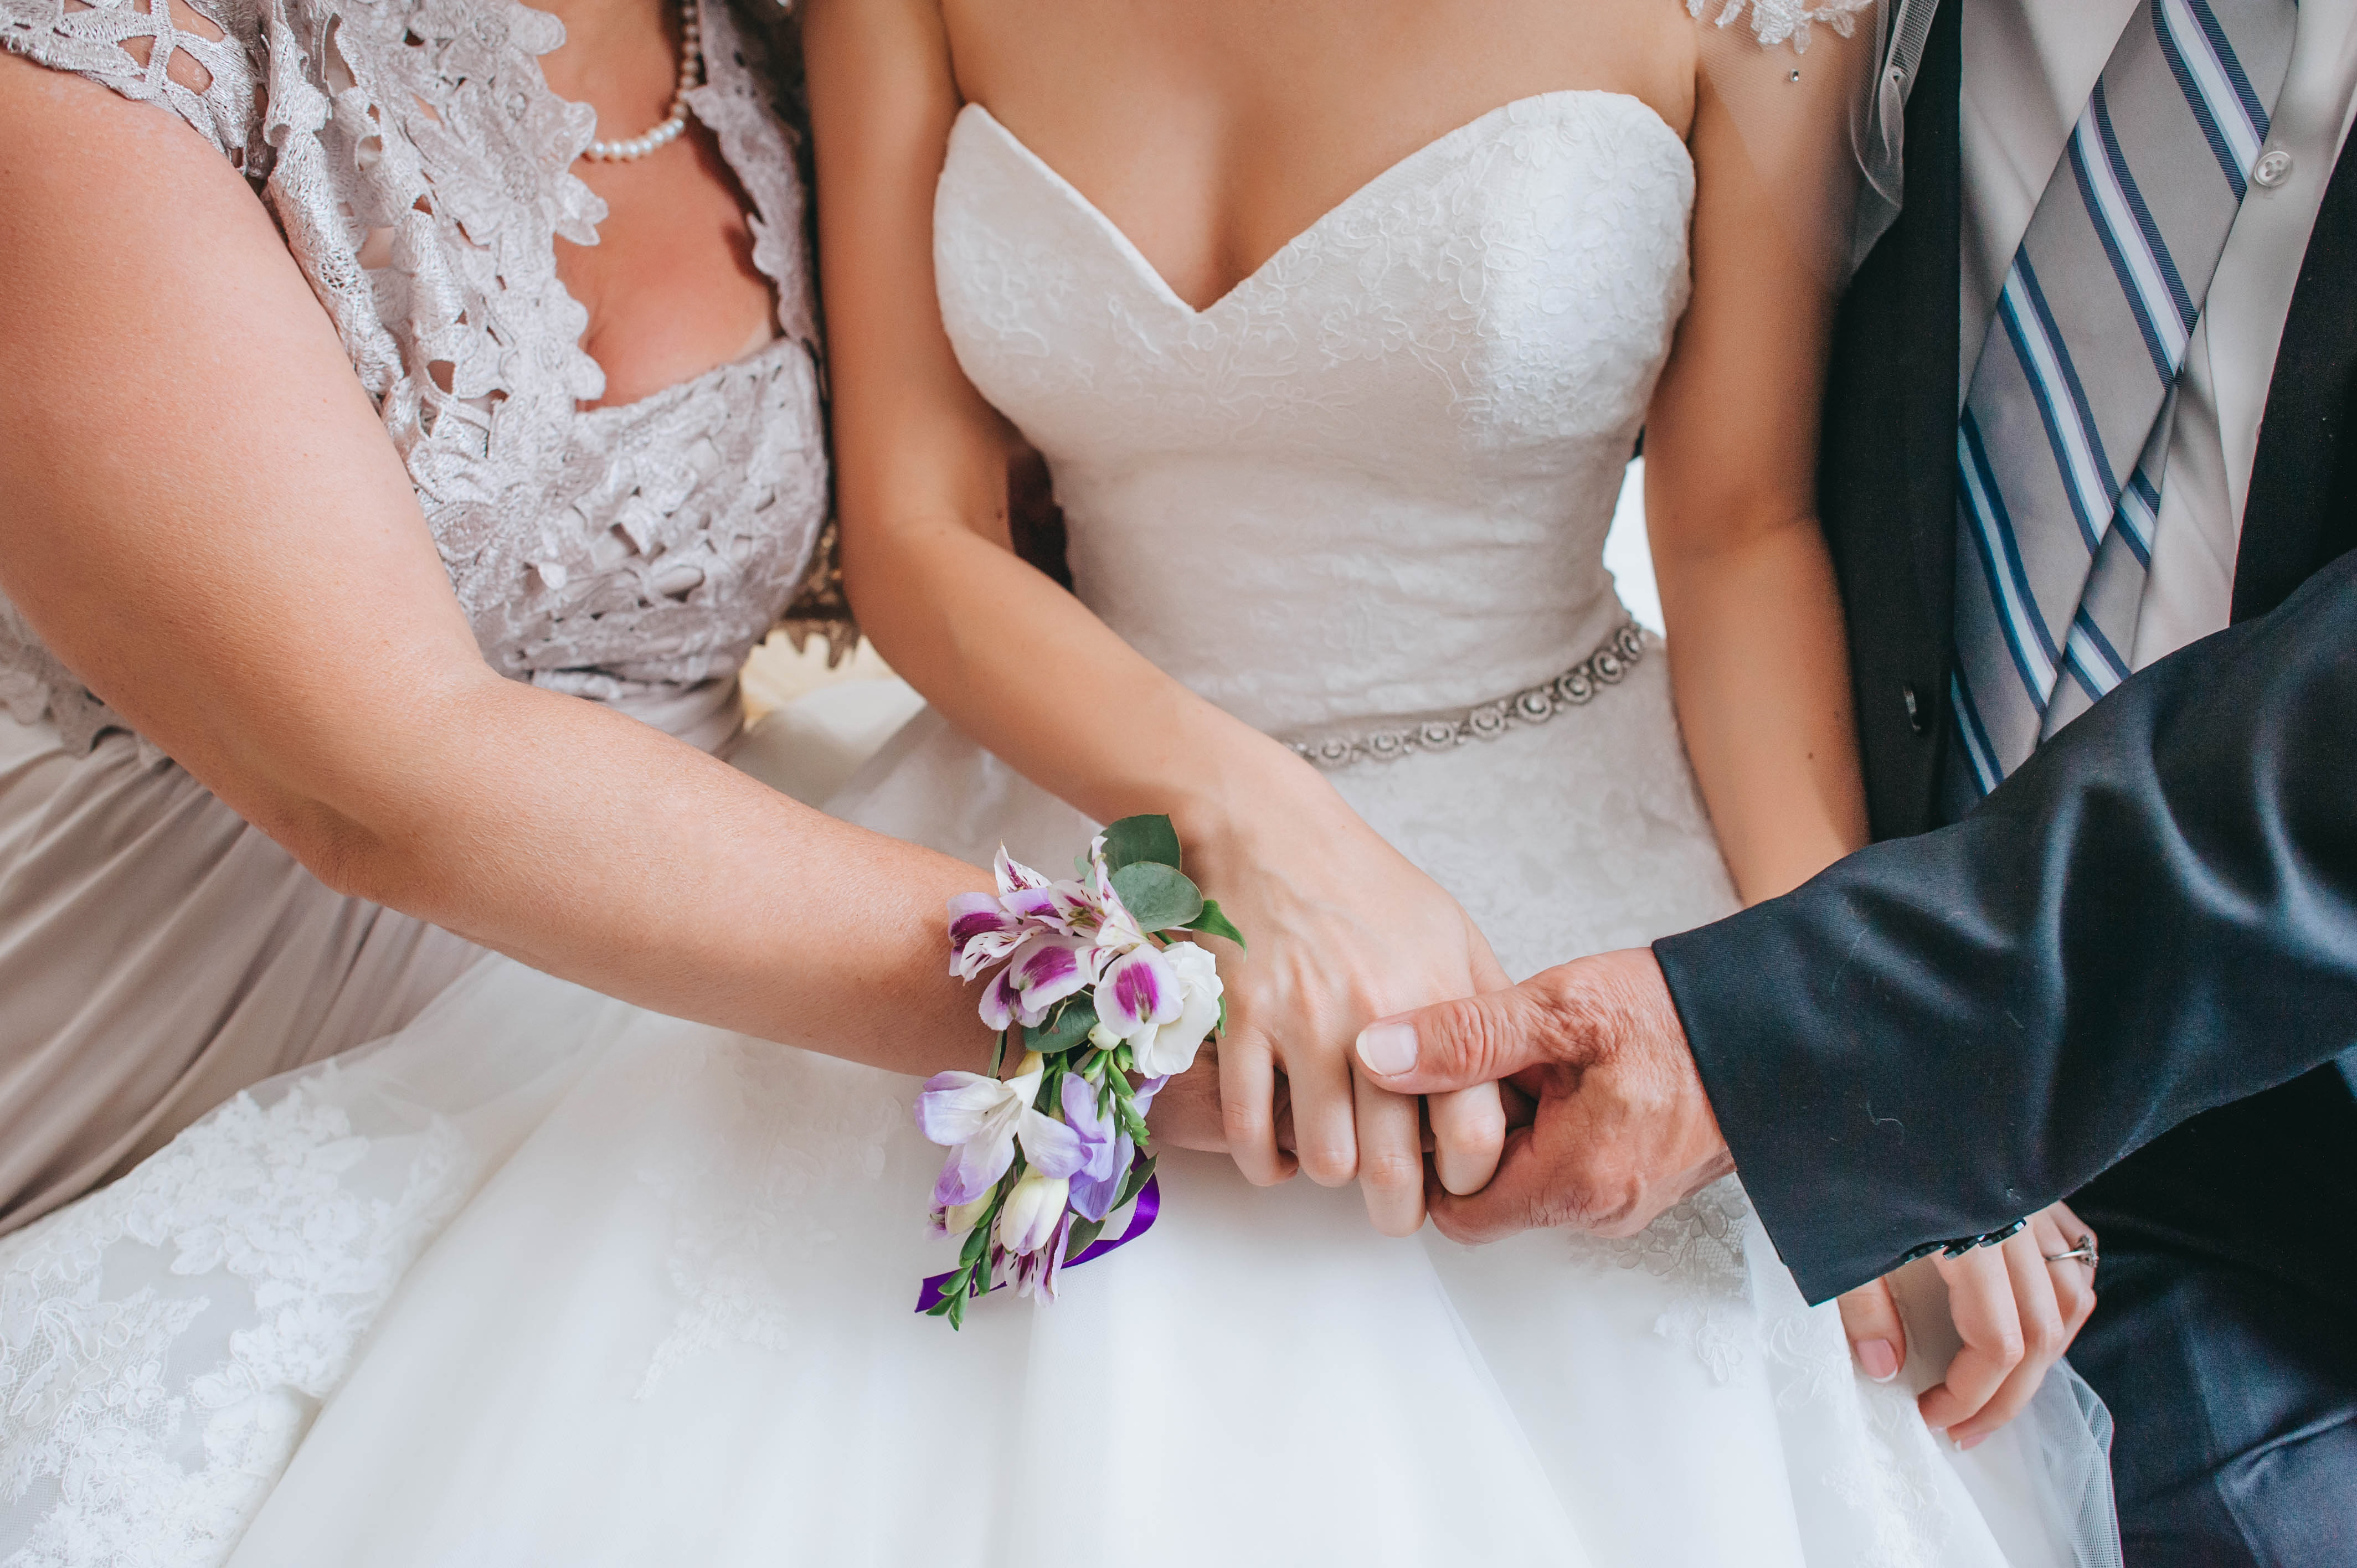 A couple holding the bride's hand | Source: Shutterstock